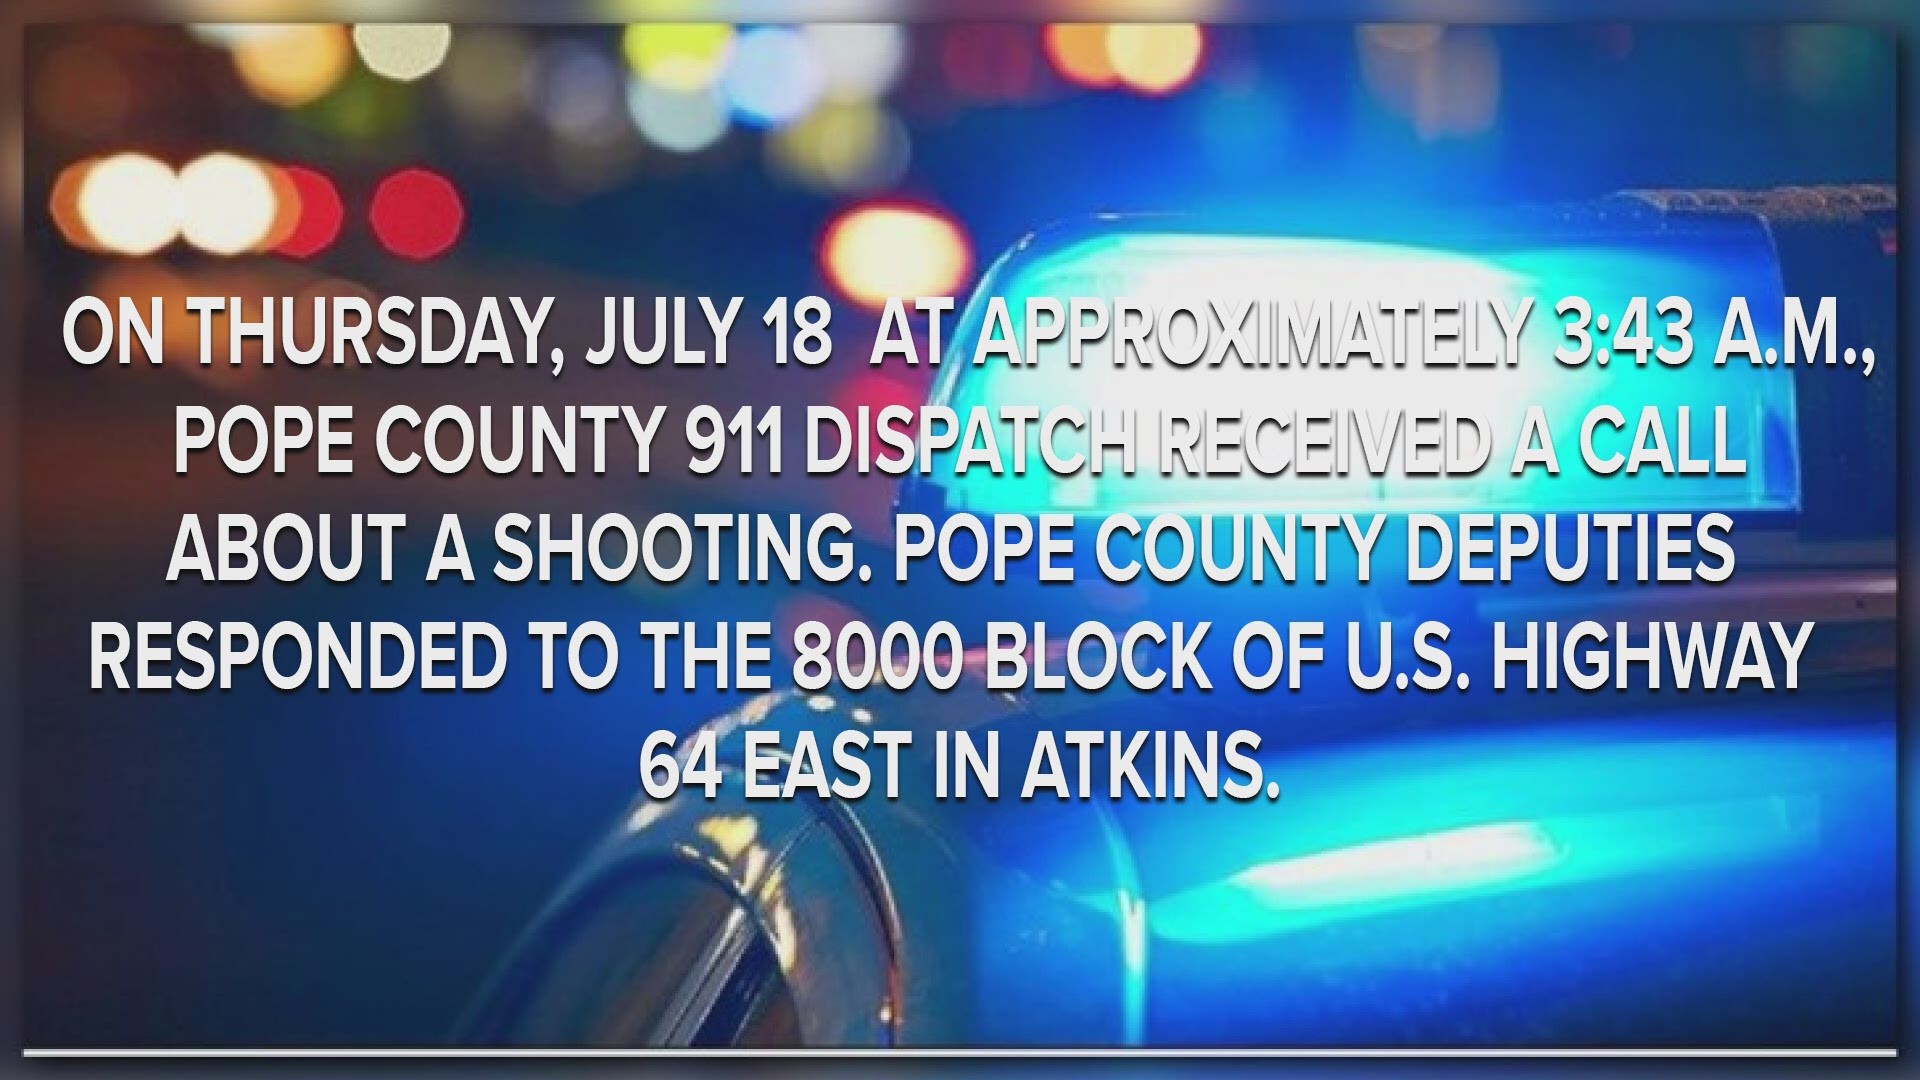 On Thursday, July 18 at approximately 3:43 a.m., Pope County 911 Dispatch received a call about a shooting.